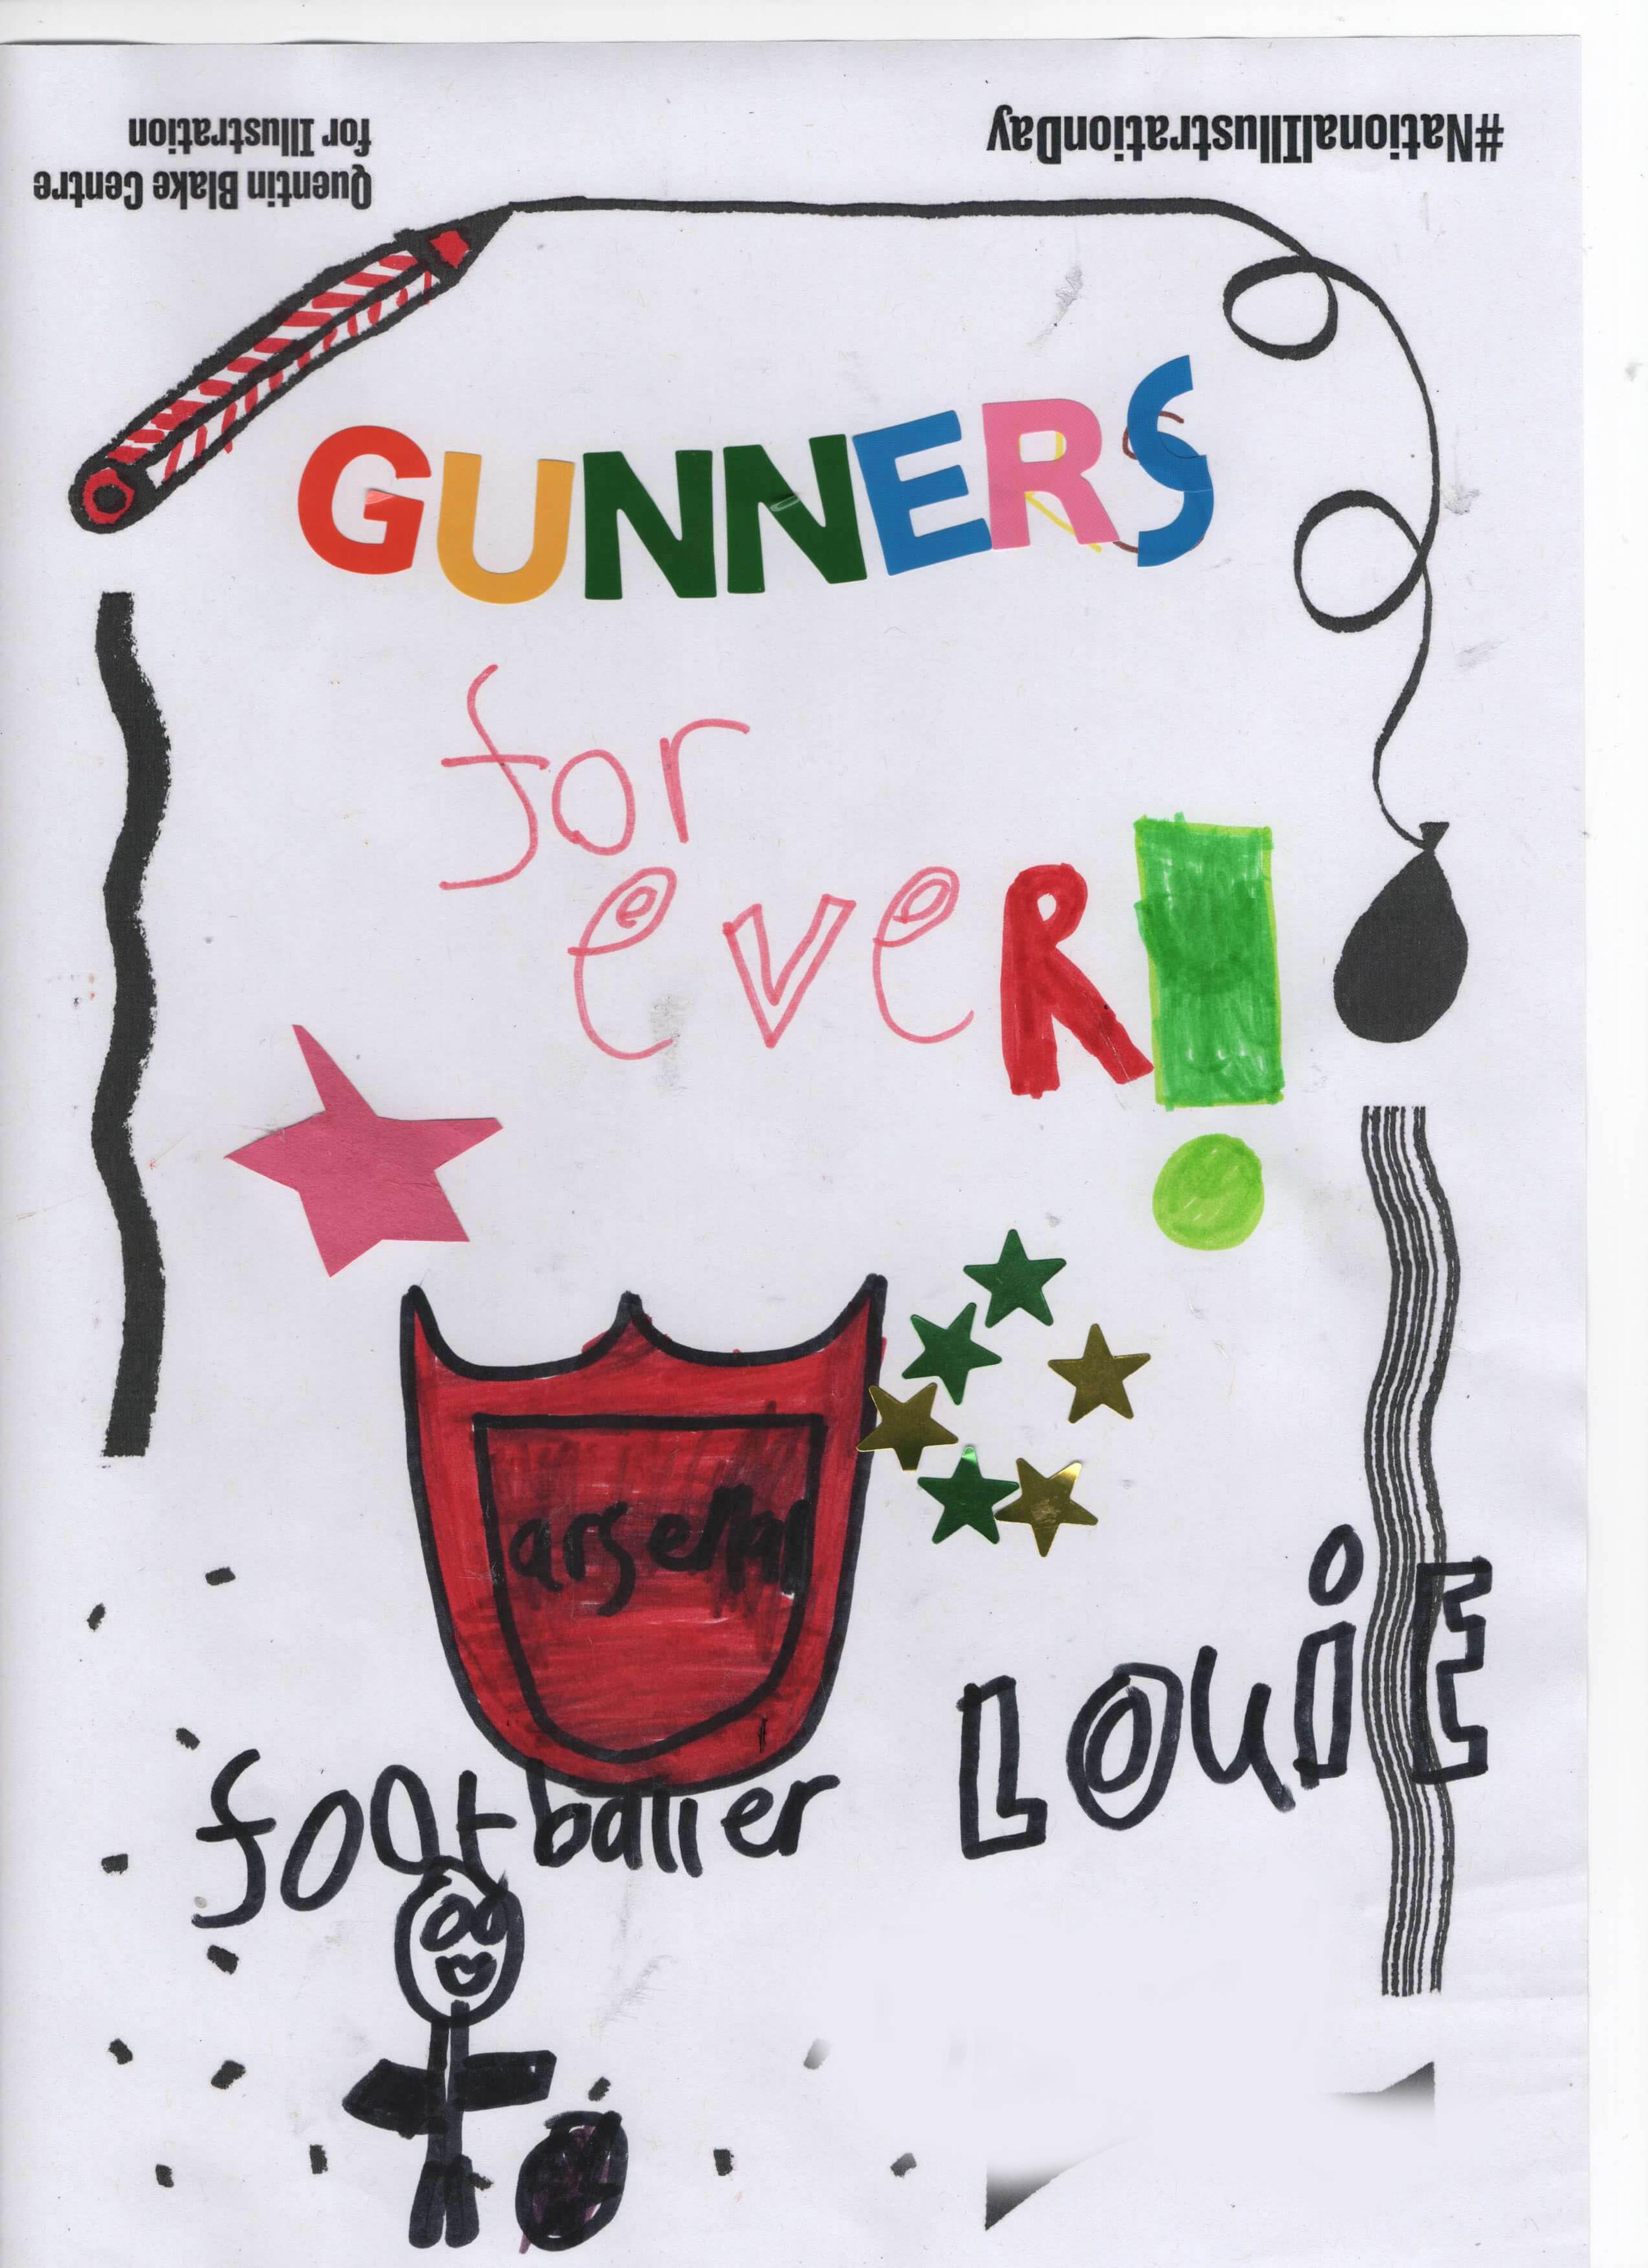 A red Arsenal crest surrounded by stars and a small figure with a ball. The picture includes the words "Gunners forever! Footballer Louie"